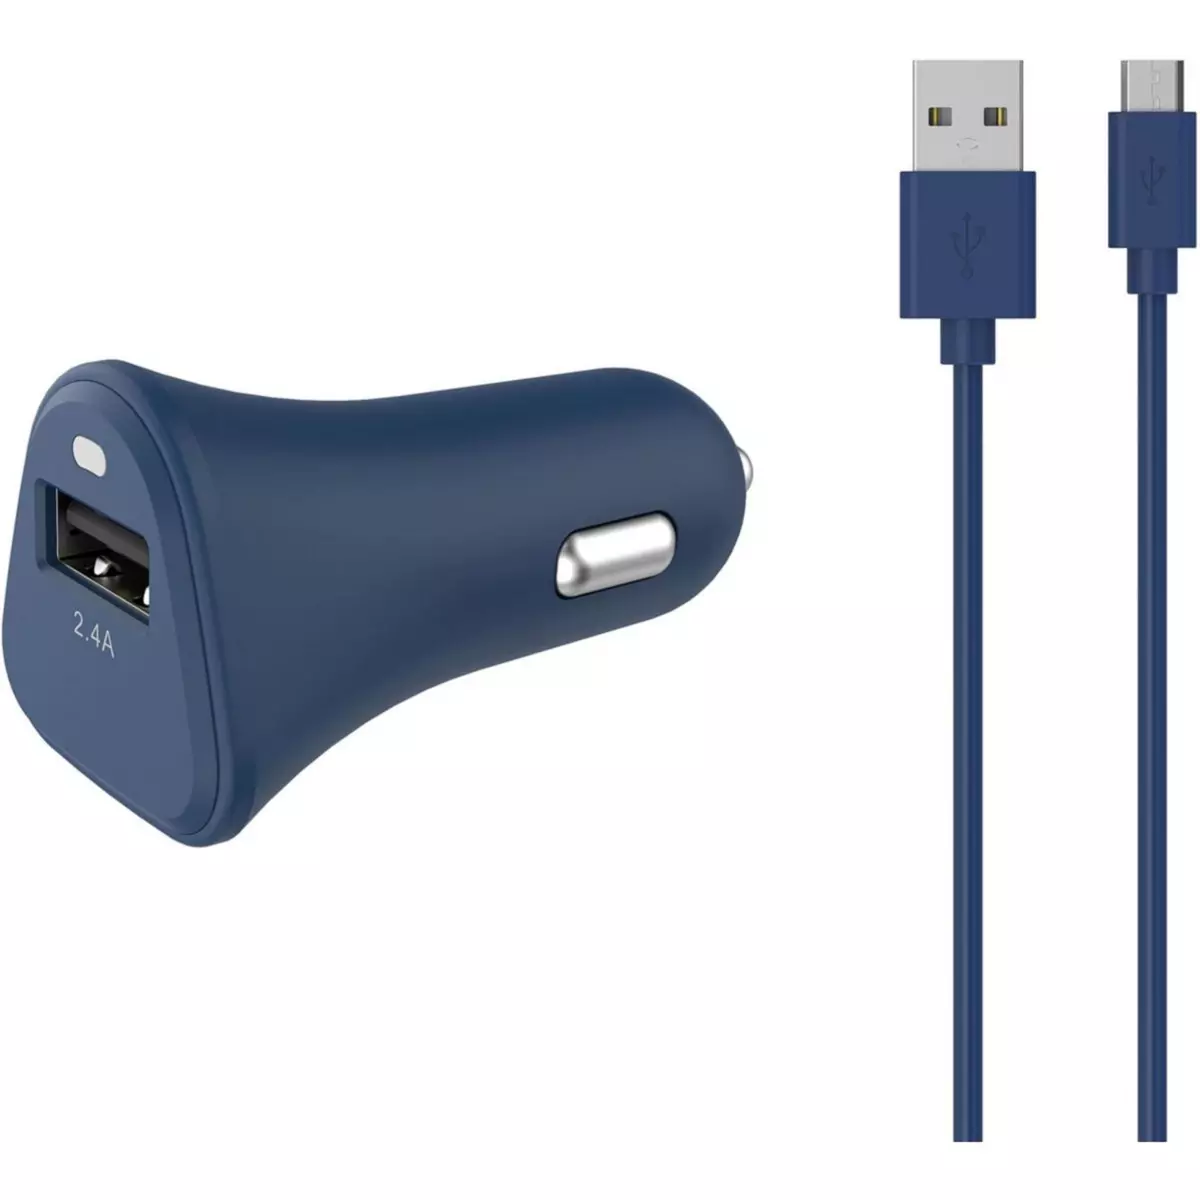 ESSENTIEL B Chargeur allume-cigare USB 2,4A + Cable Micro-USB bleu nuit